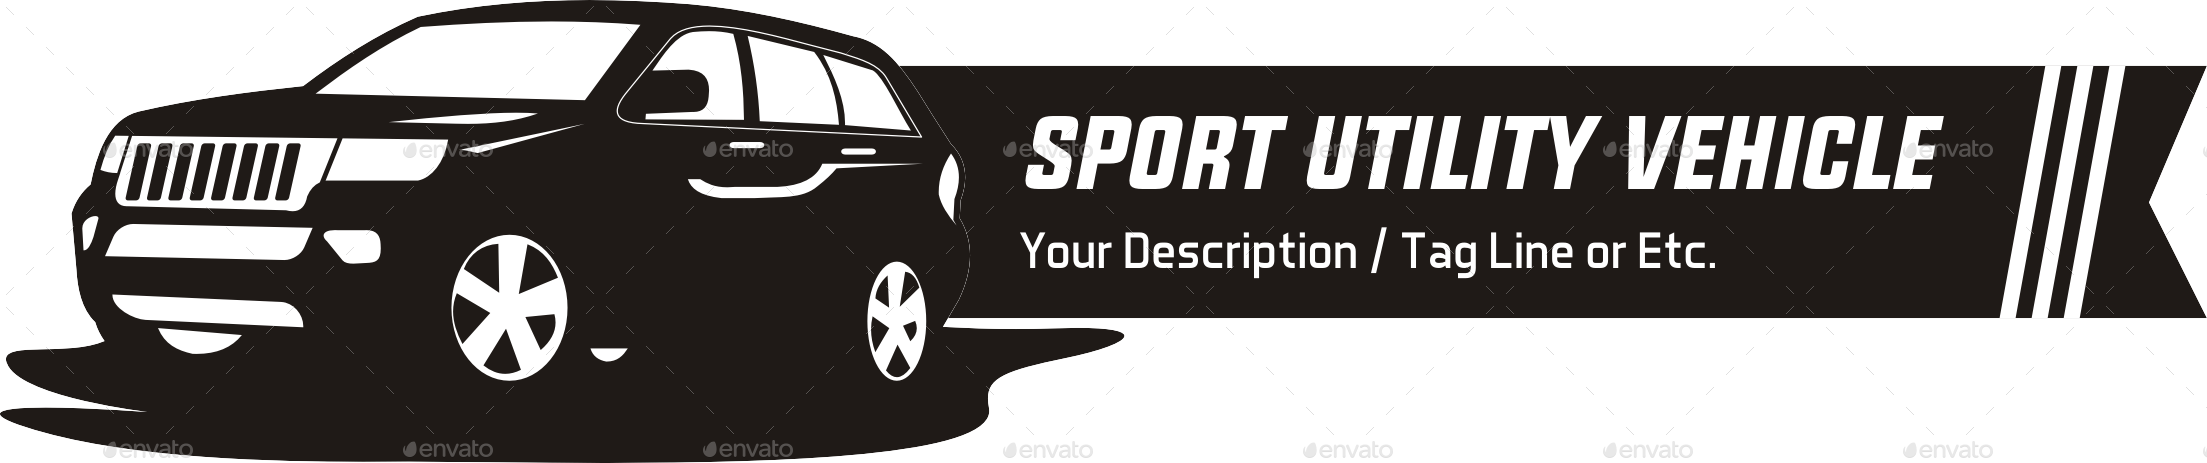 Sport Utility Vehicle Graphic Banner PNG image